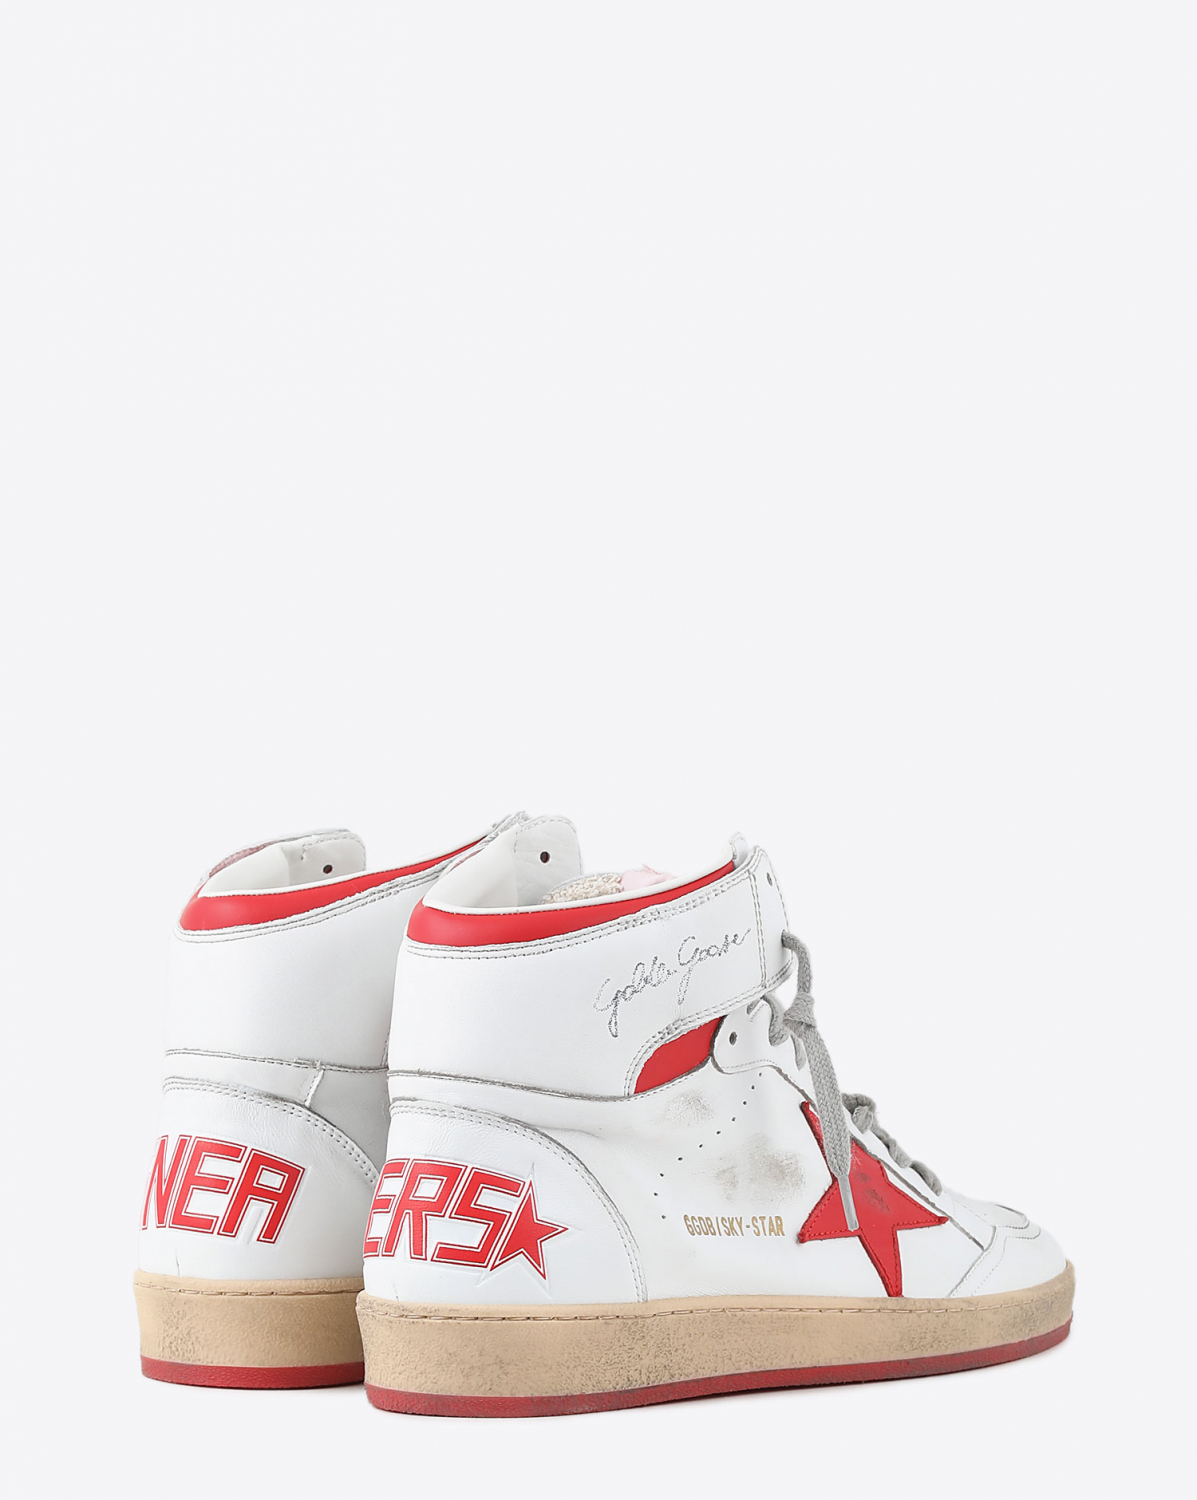 Sneakers Golden Goose Woman Permanent Sky Star Women - White Red 10350
